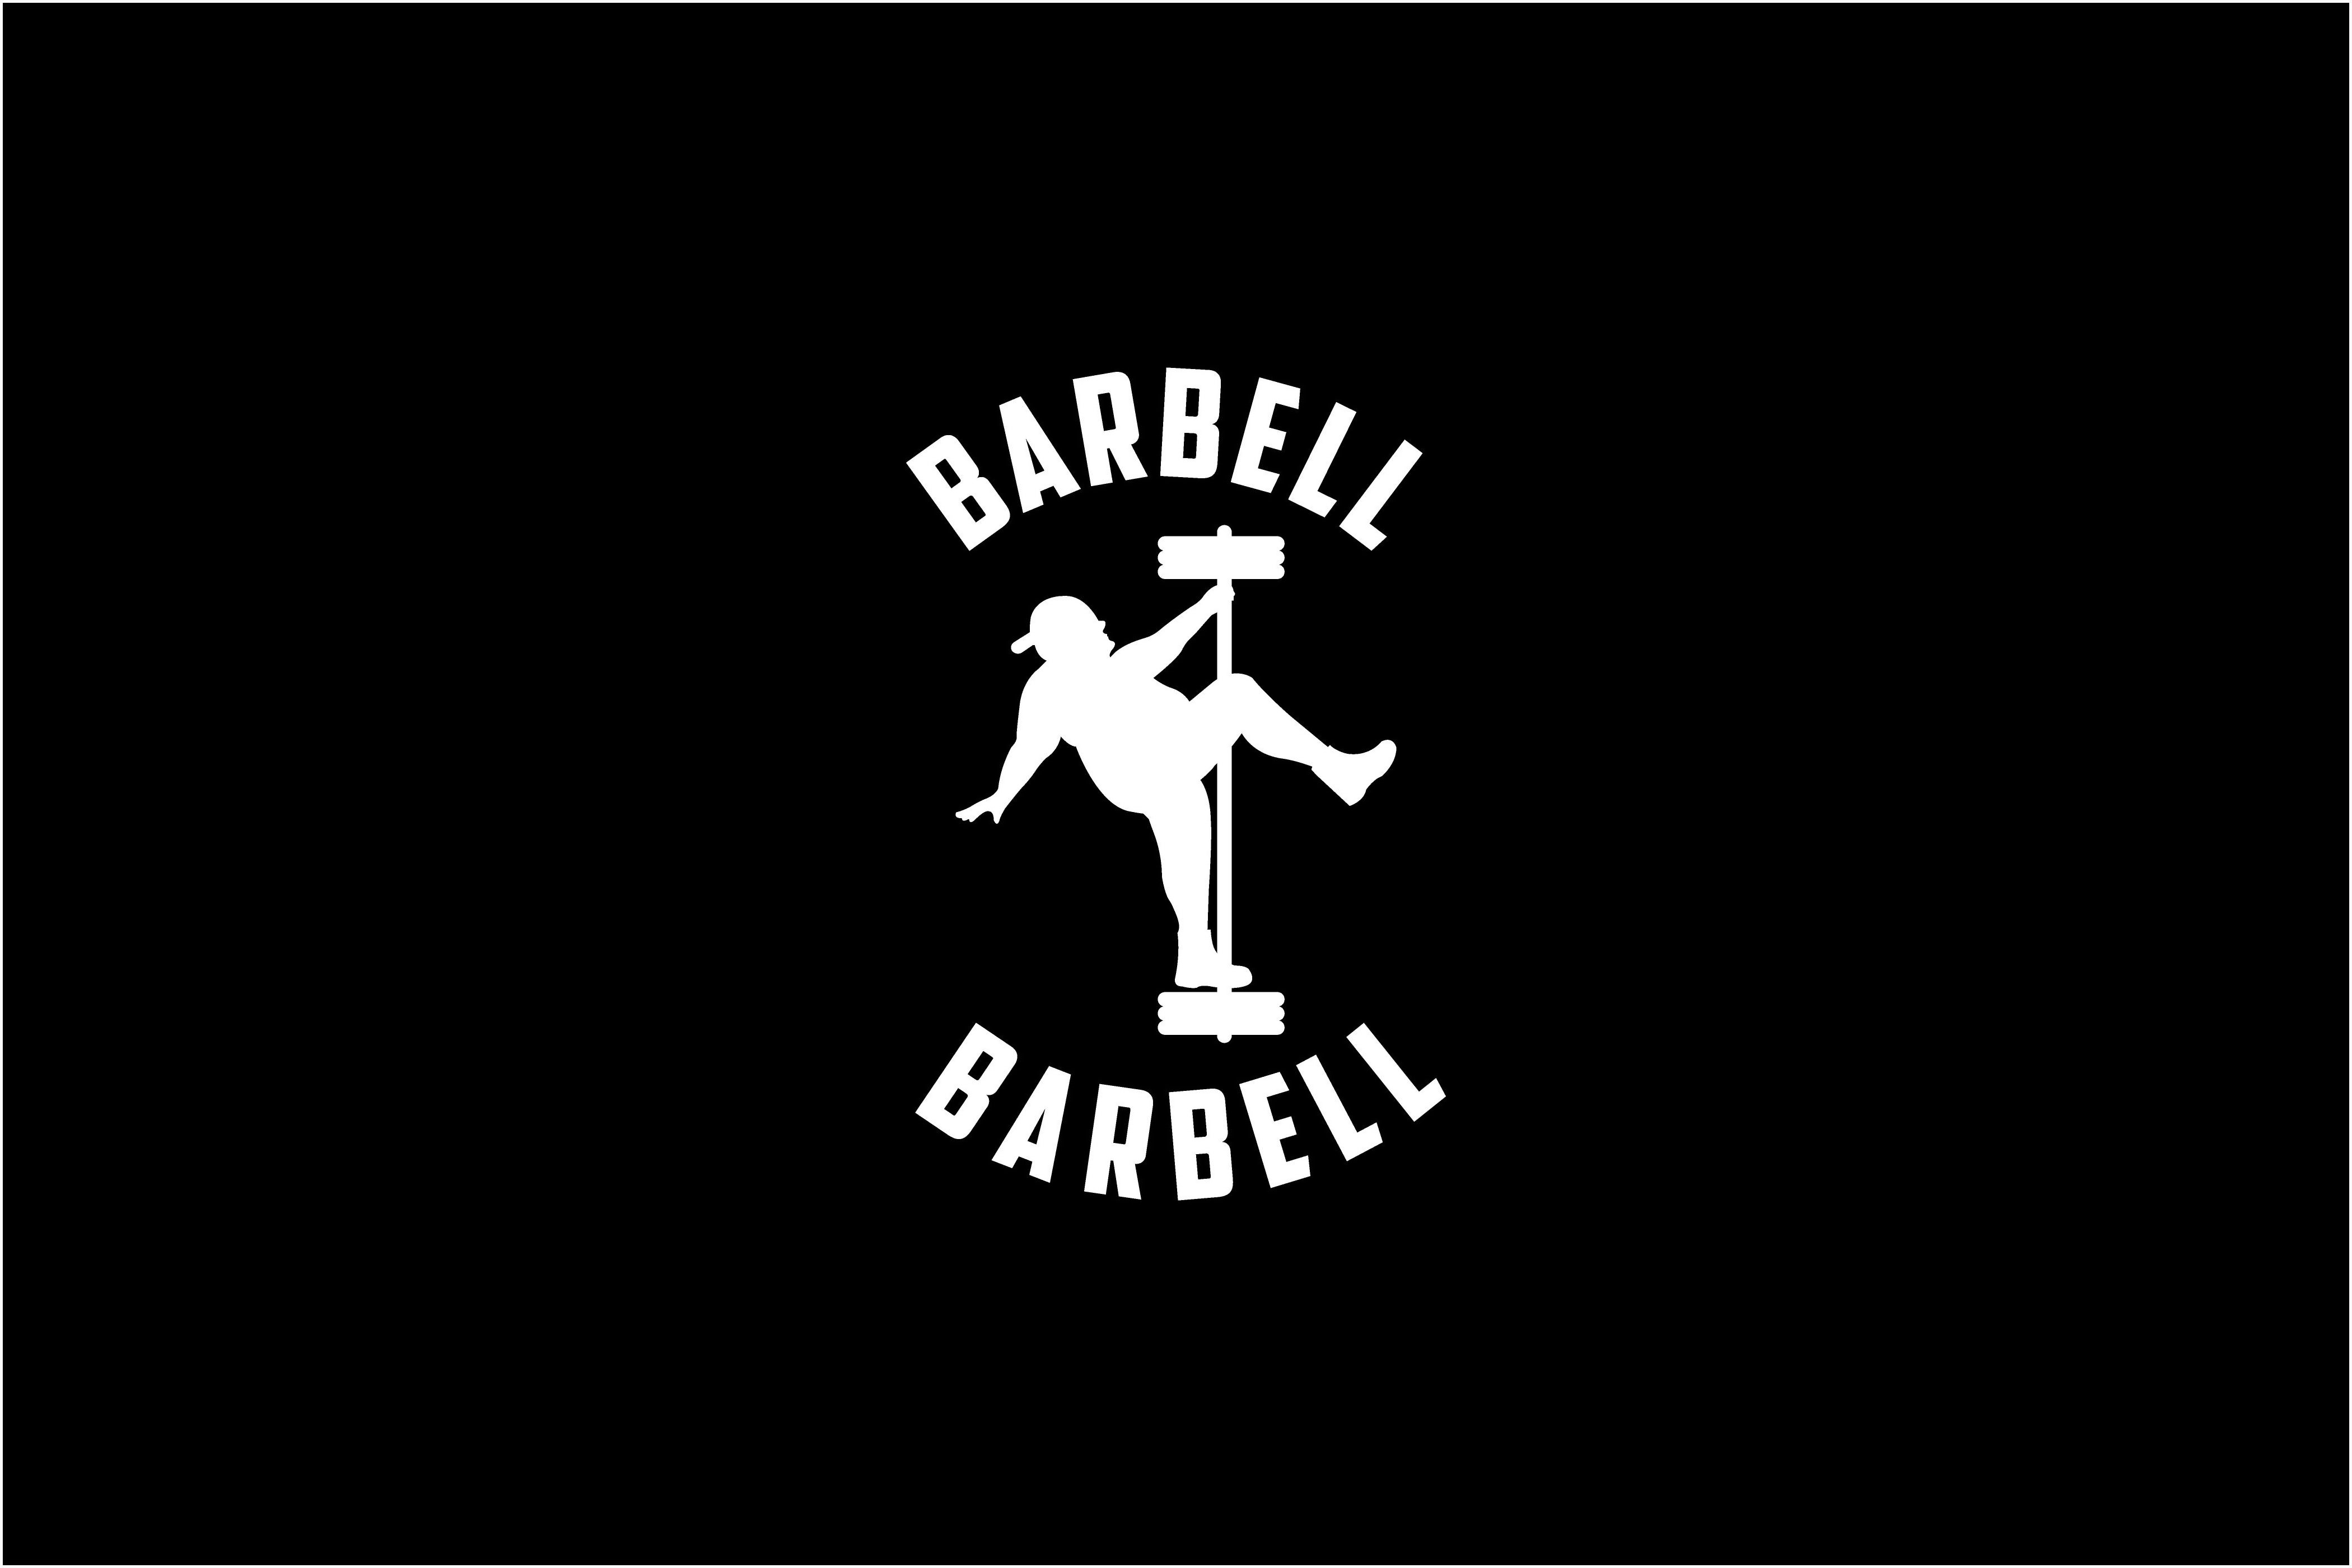 BARBELL BARBELL